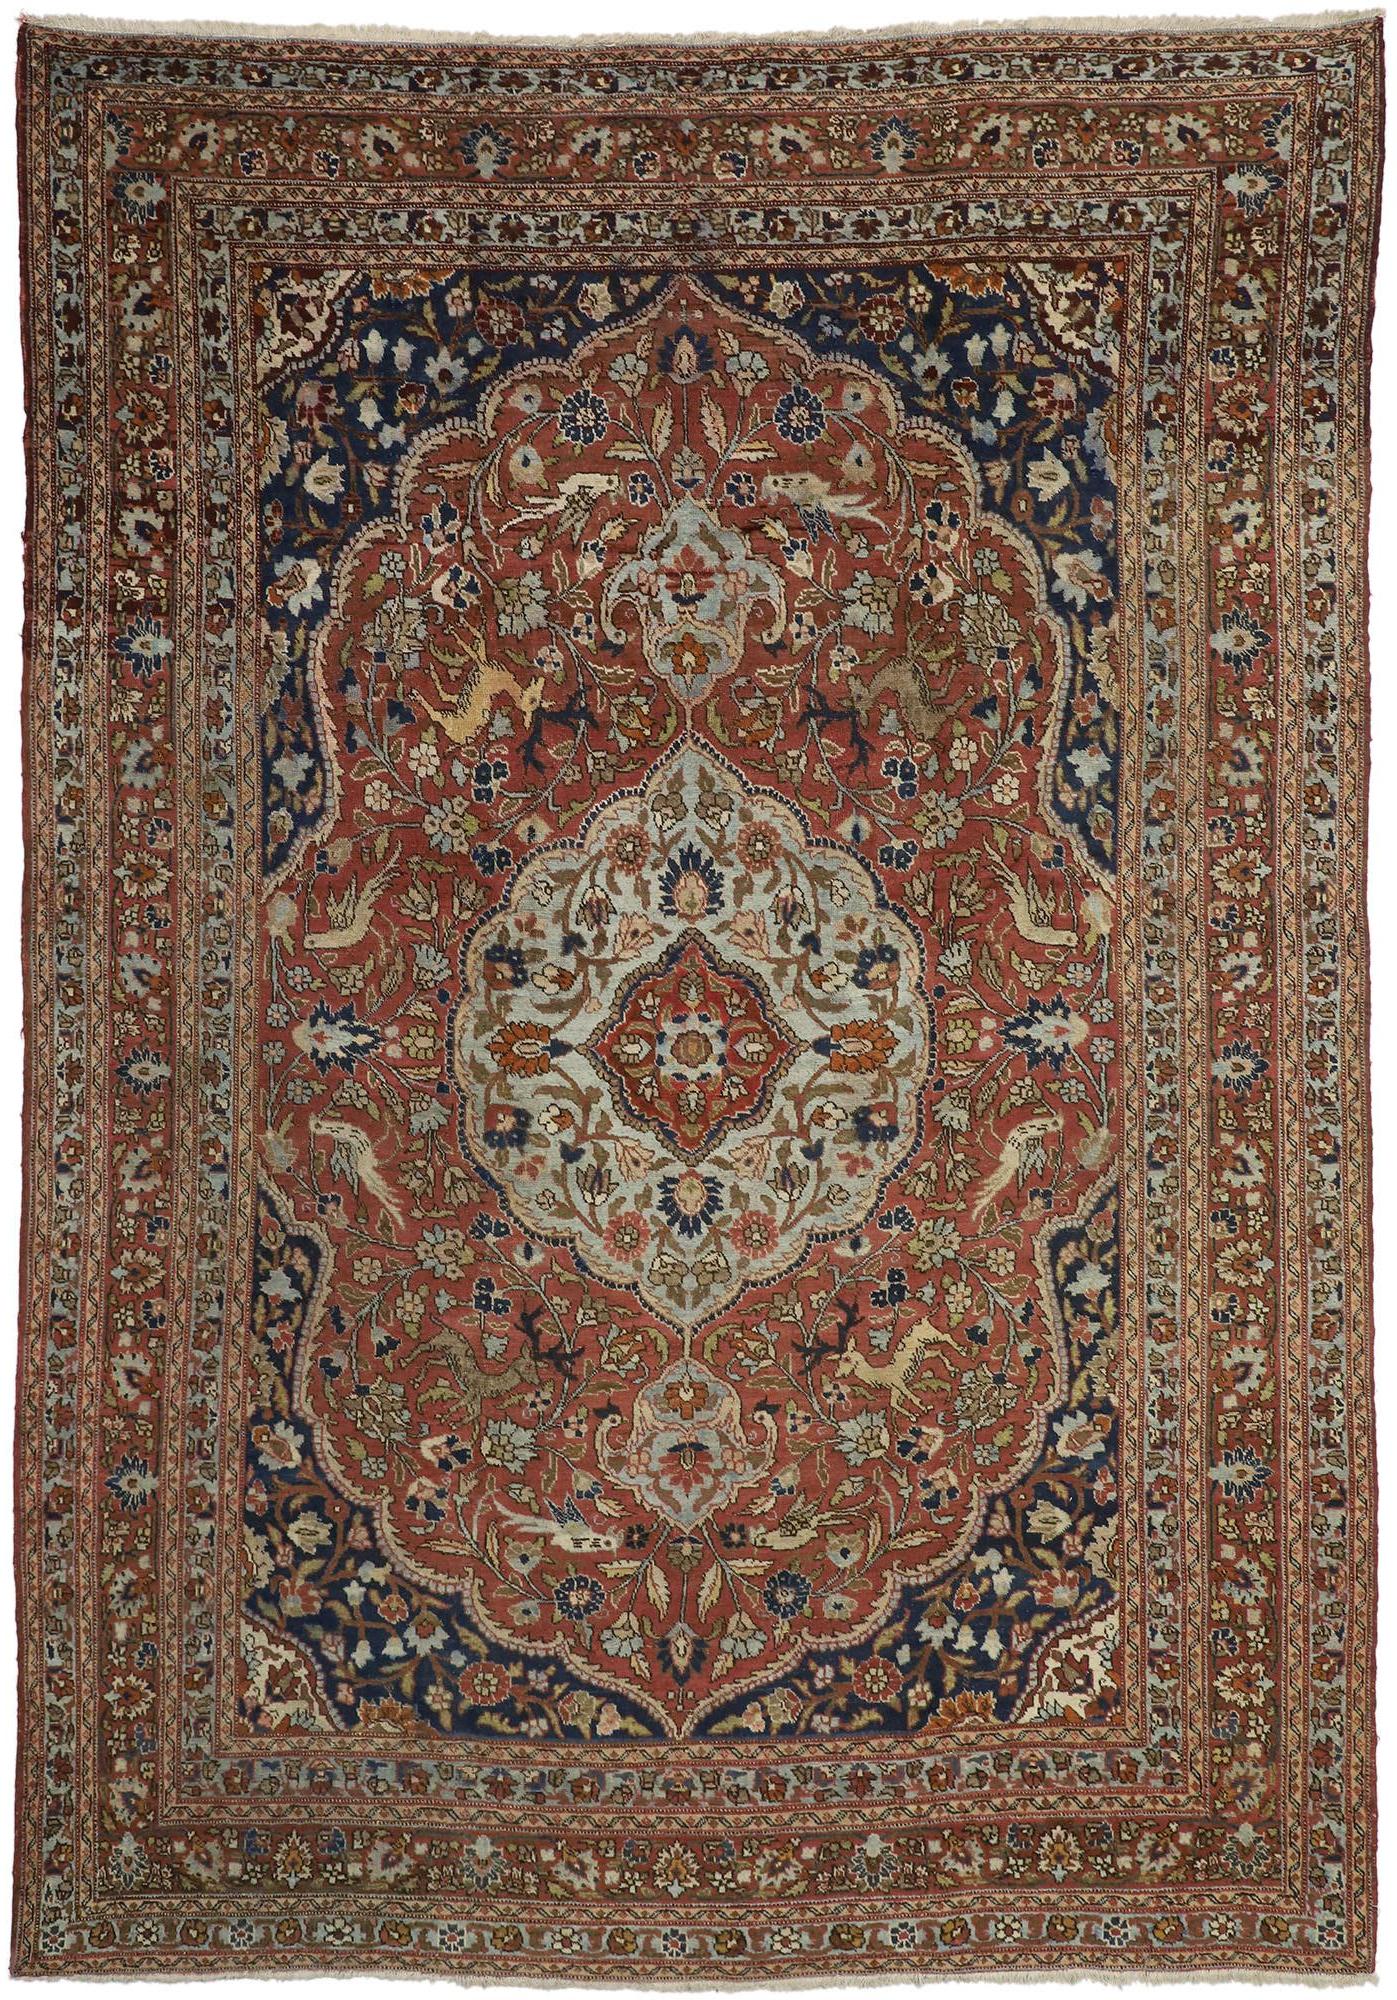 73111 Antique Persian Tabriz Palace Size Rug with Arts & Crafts Renaissance Style 09'00 x 13'00. With its timeless elegance and regal charm, this hand knotted wool antique Persian Tabriz rug features a sixteen point scalloped medallion filled with